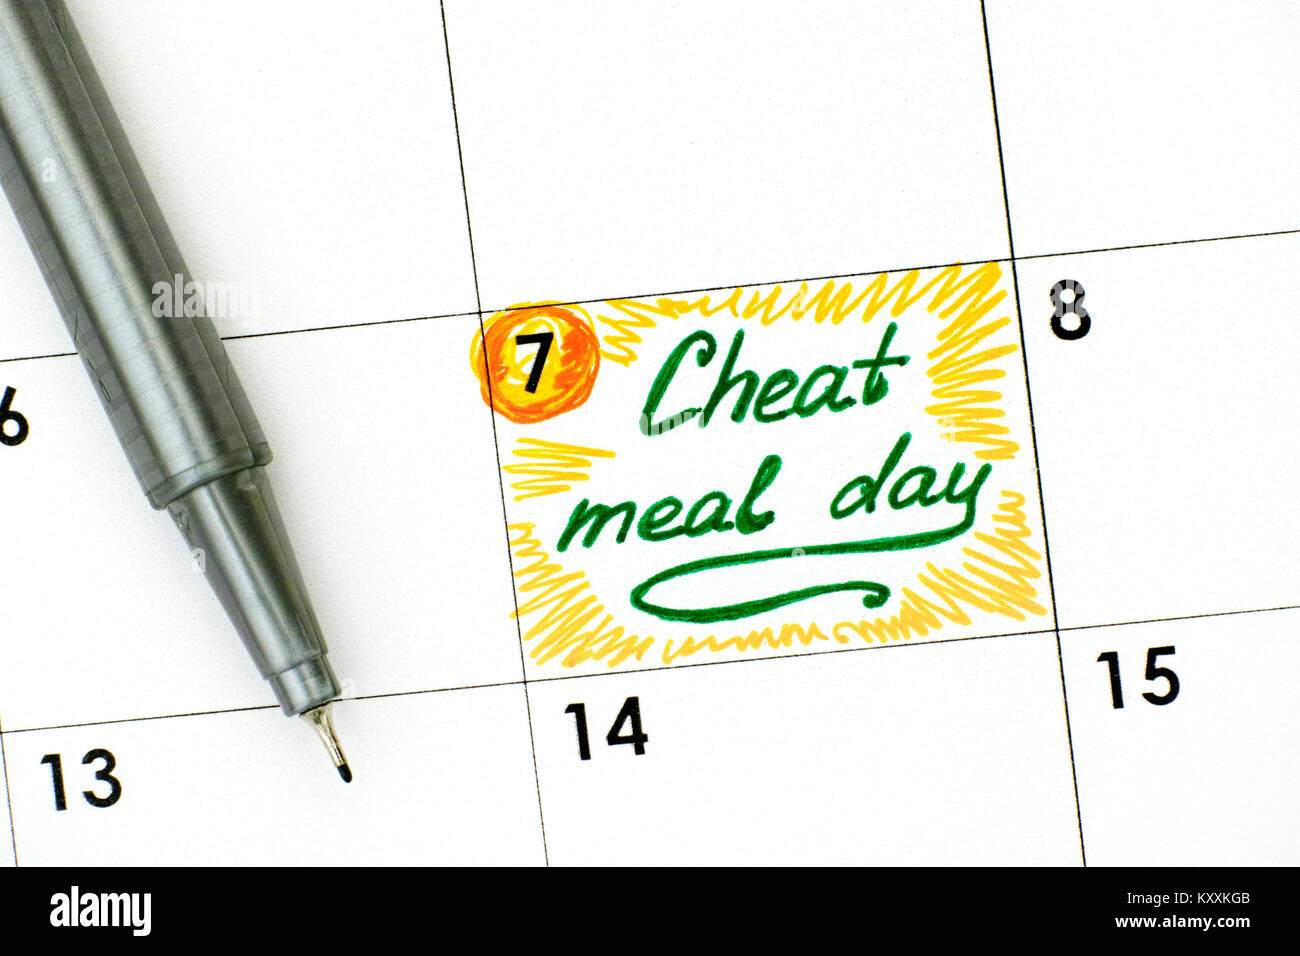 Reminder Cheat Meal Day in calendar with green pen. Close-up. Stock Photo